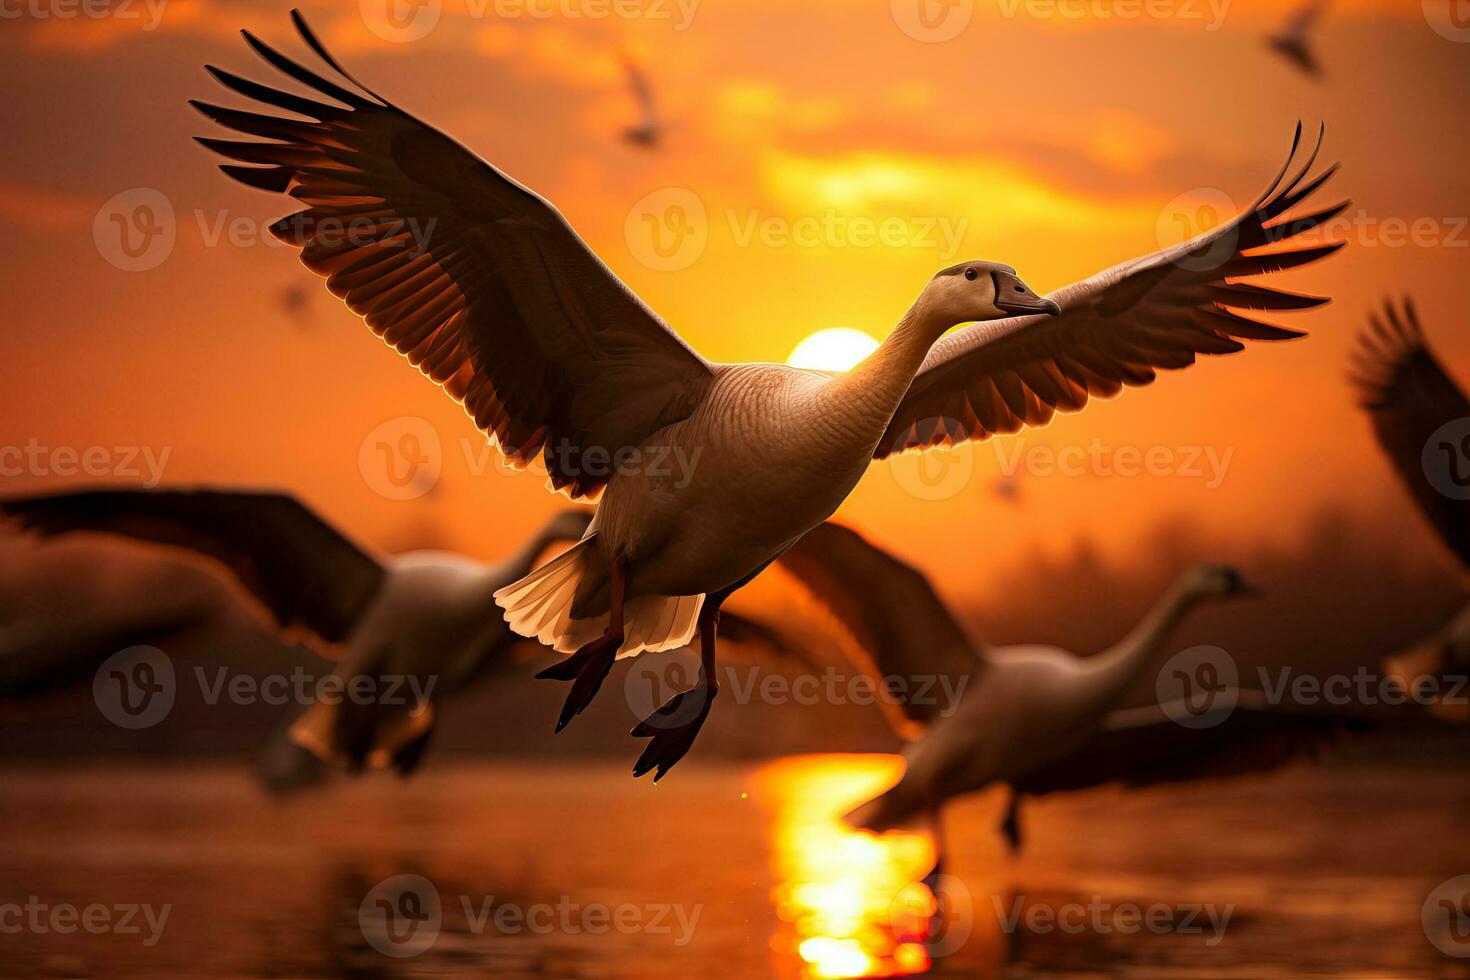 A majestic flock of geese gracefully soars through a golden sky during their annual autumn migration photo